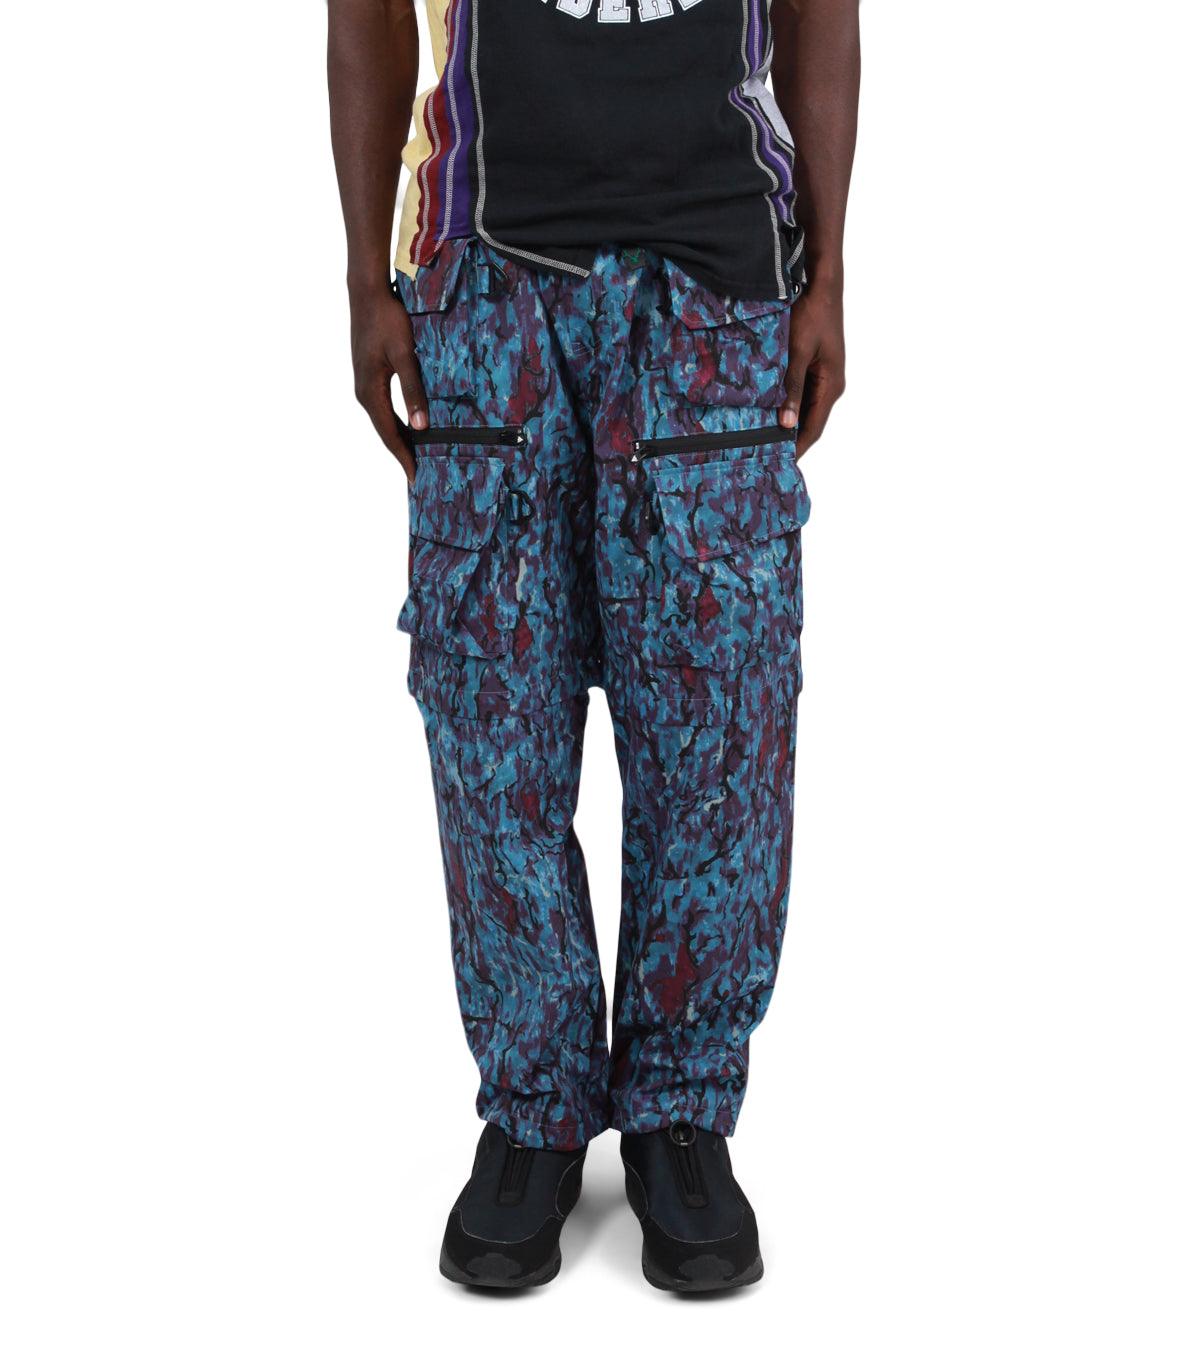 South2 West8 Multi-Pocket Belted 2Way Pants Printed Camo | SOMEWHERE